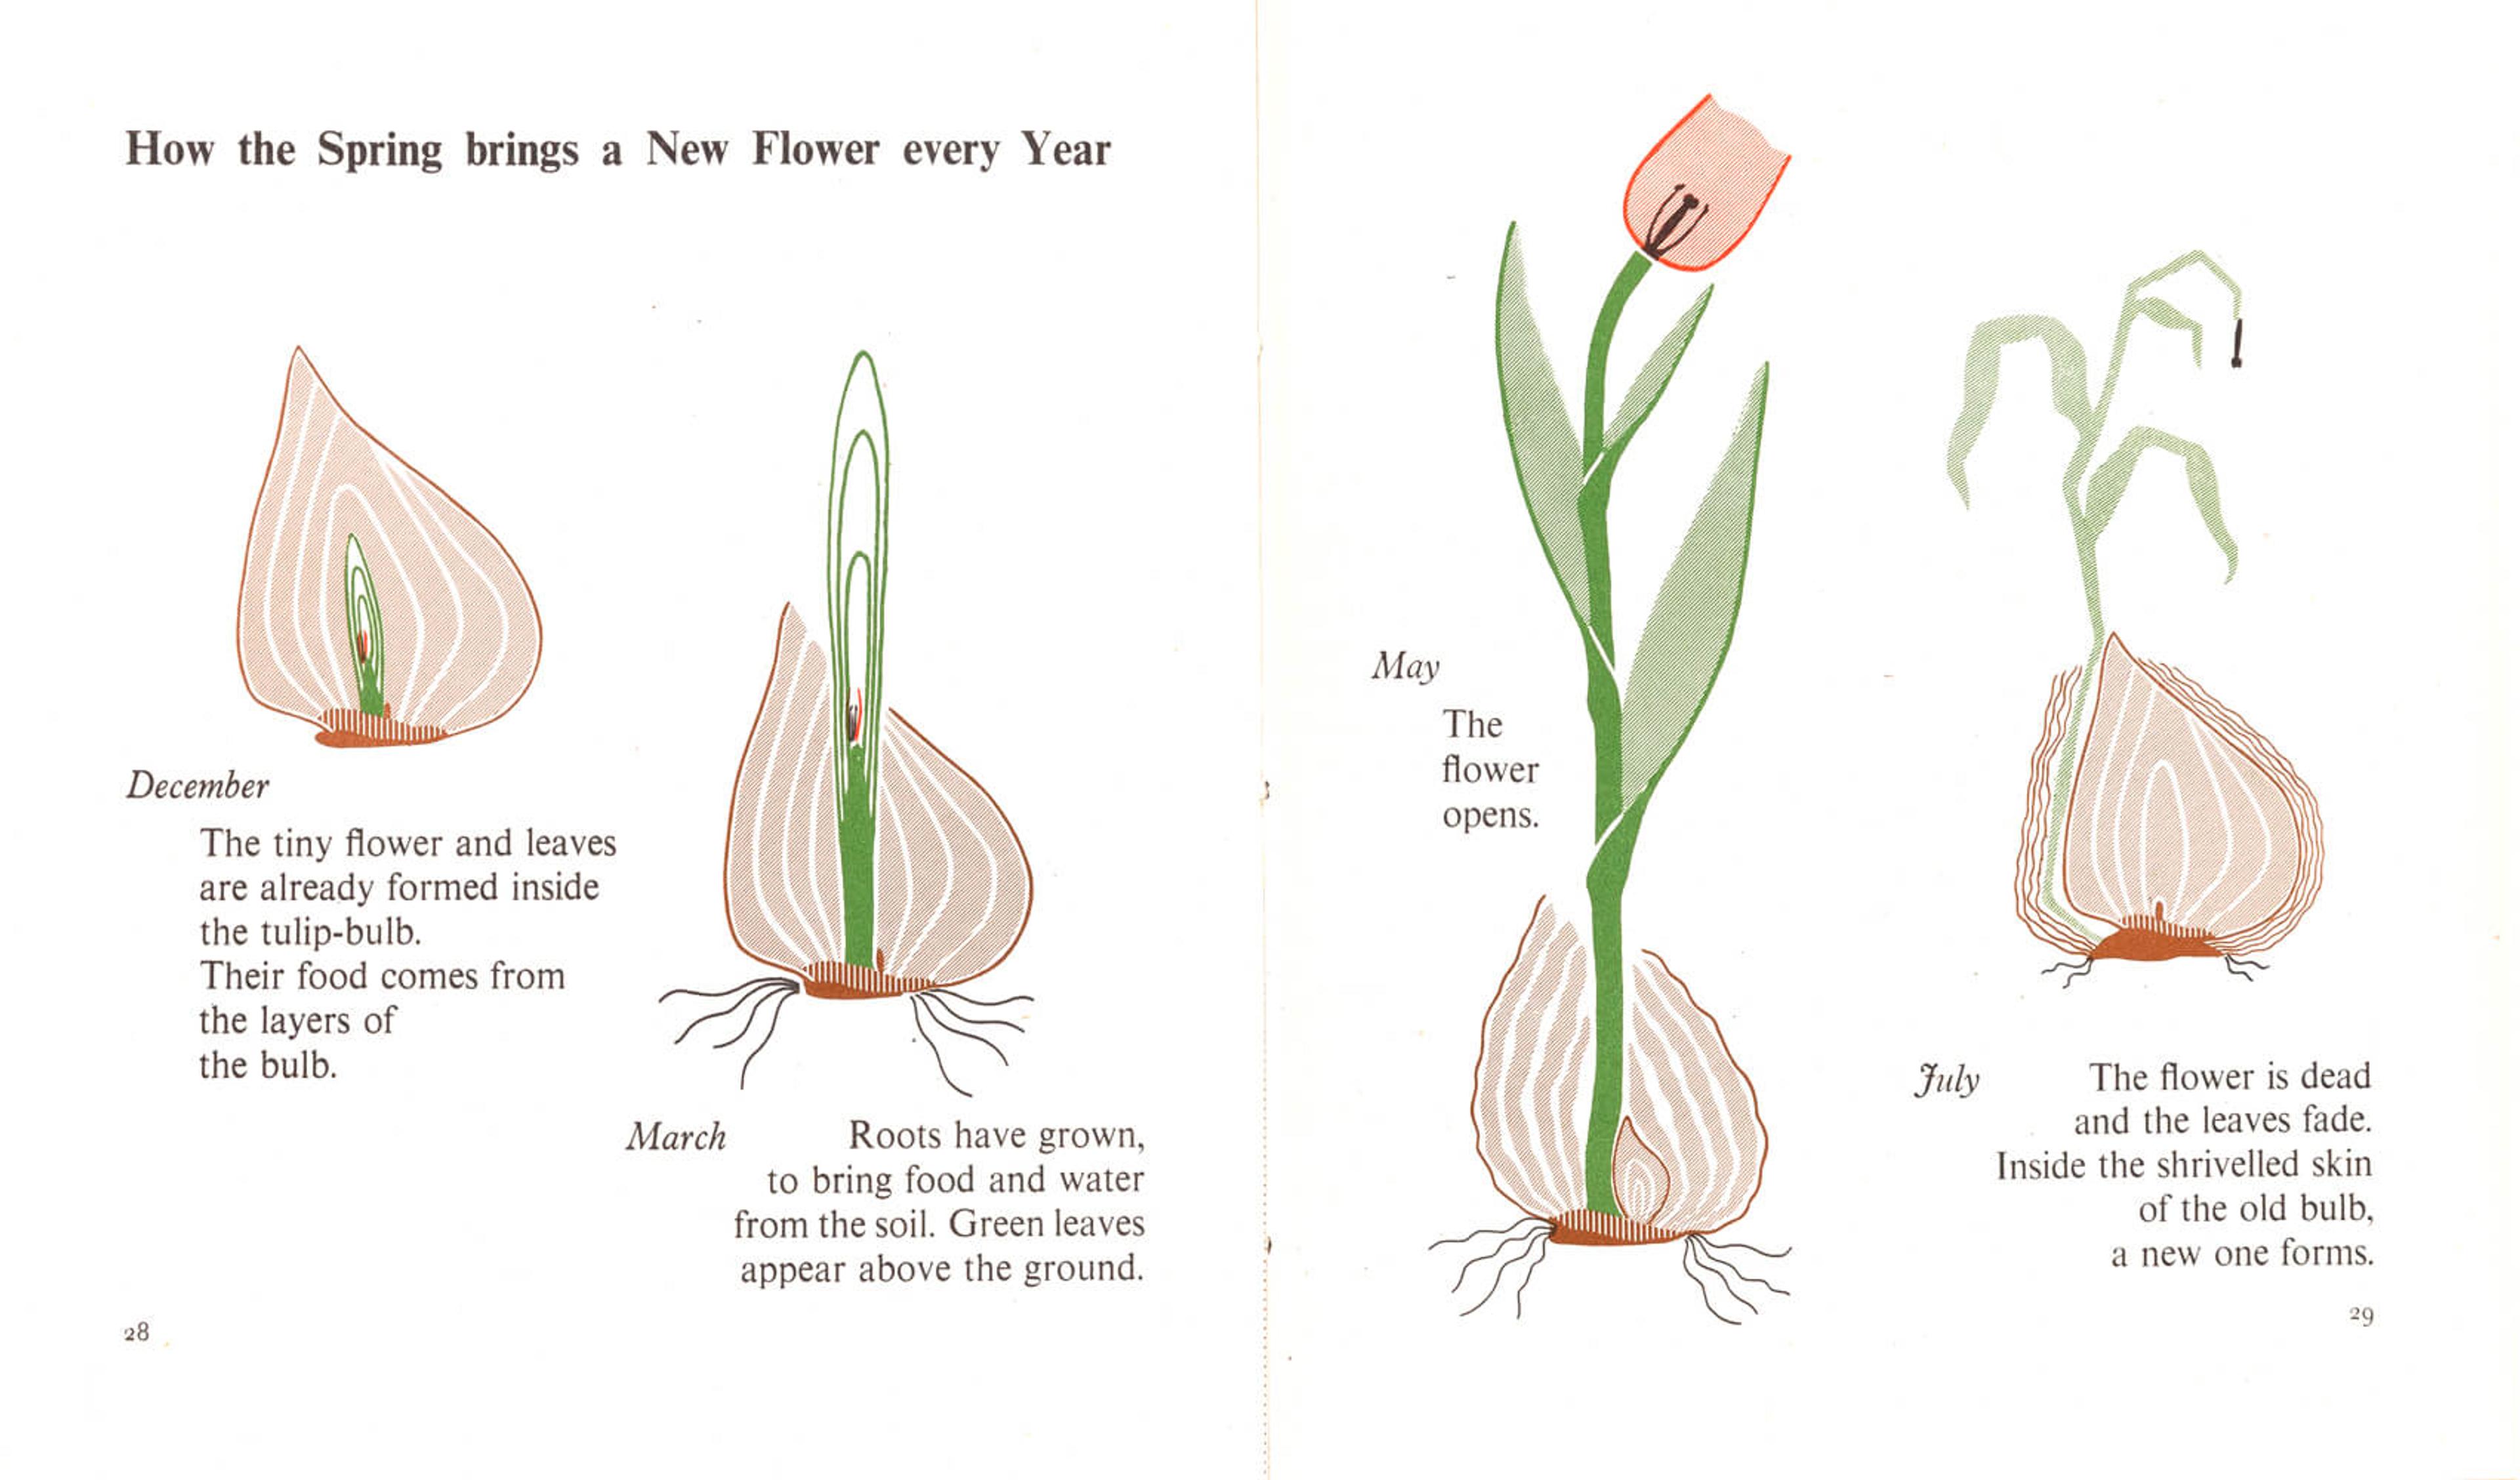 Sequential illustration of how tulips bloom from bulbs